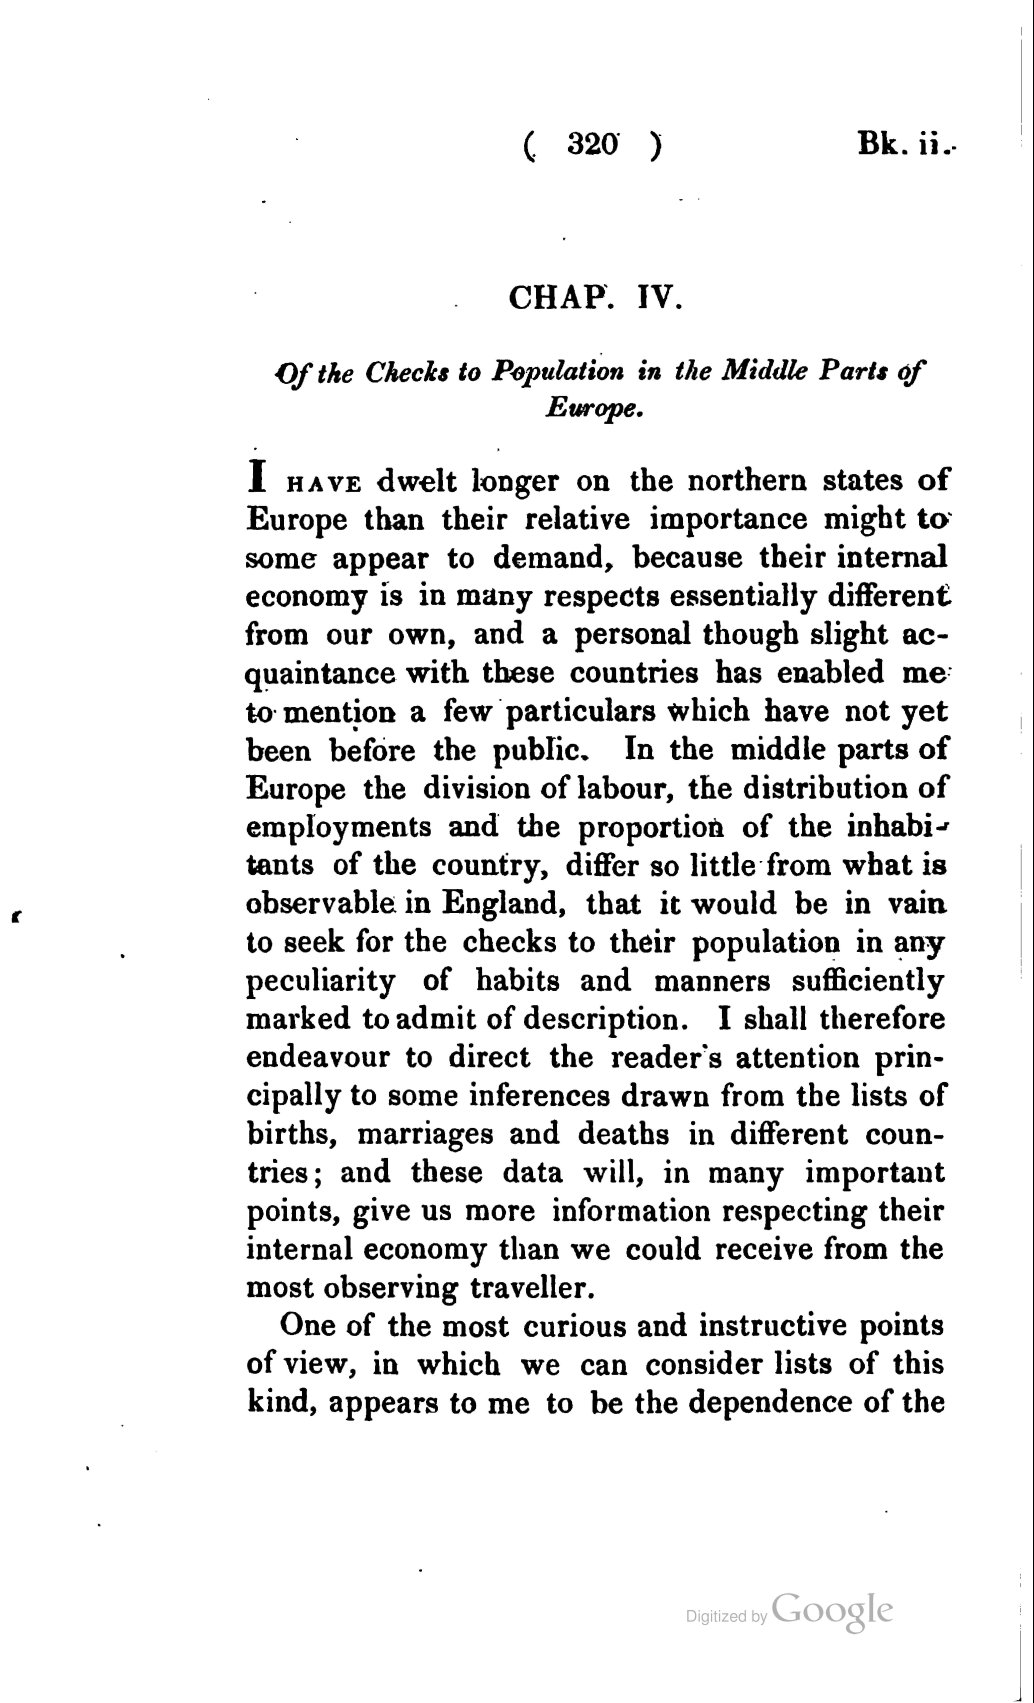 Malthus, Thomas. 1826. An essay on the principle of population; or